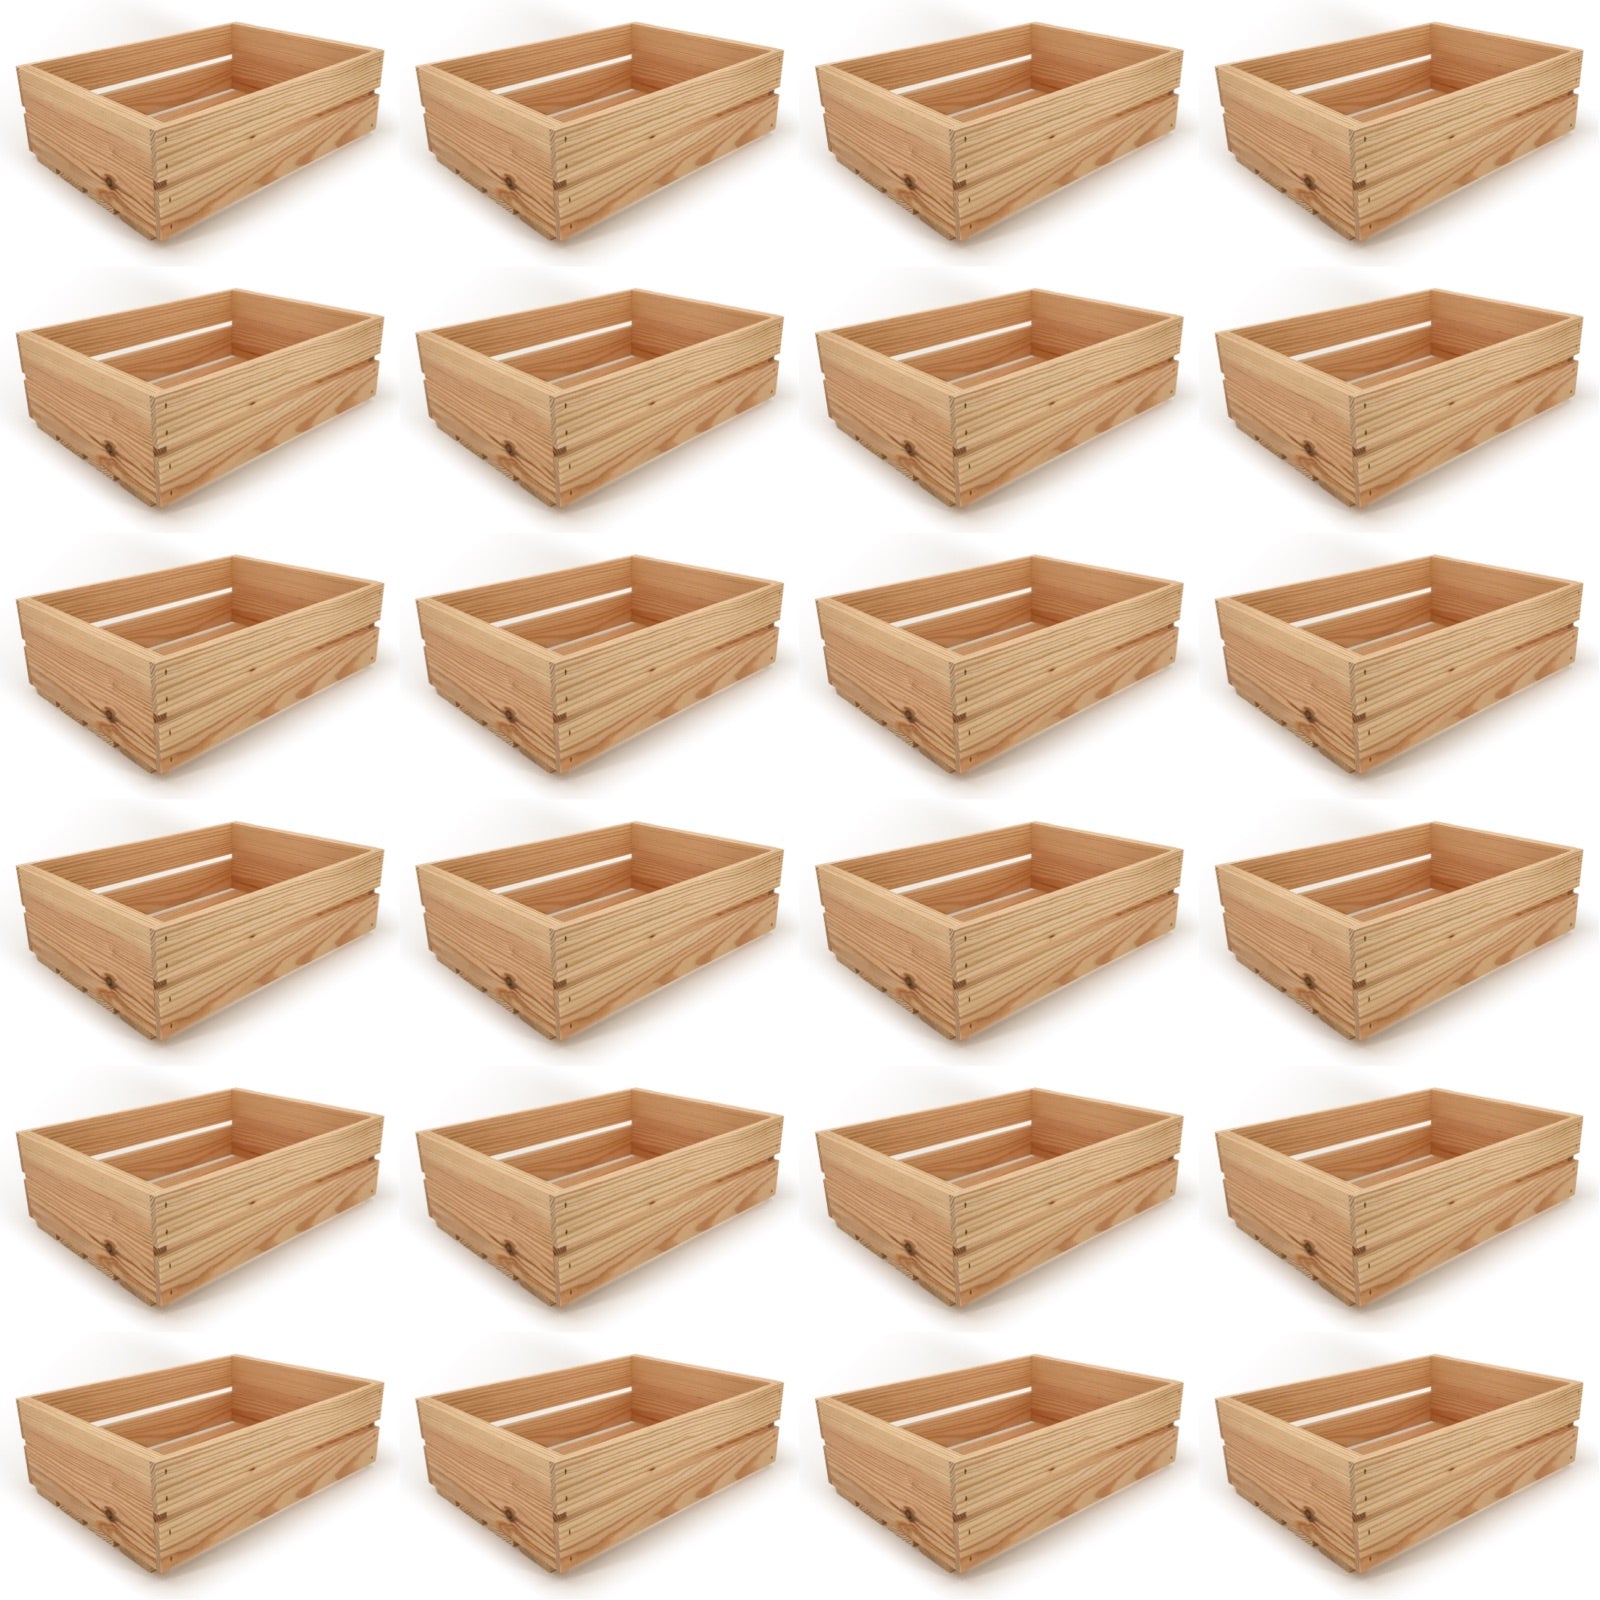 24 Small wooden crates 16x12x5.25, 6-WS-16-12-5.25-NX-NW-NL, 12-WS-16-12-5.25-NX-NW-NL, 24-WS-16-12-5.25-NX-NW-NL, 48-WS-16-12-5.25-NX-NW-NL, 96-WS-16-12-5.25-NX-NW-NL